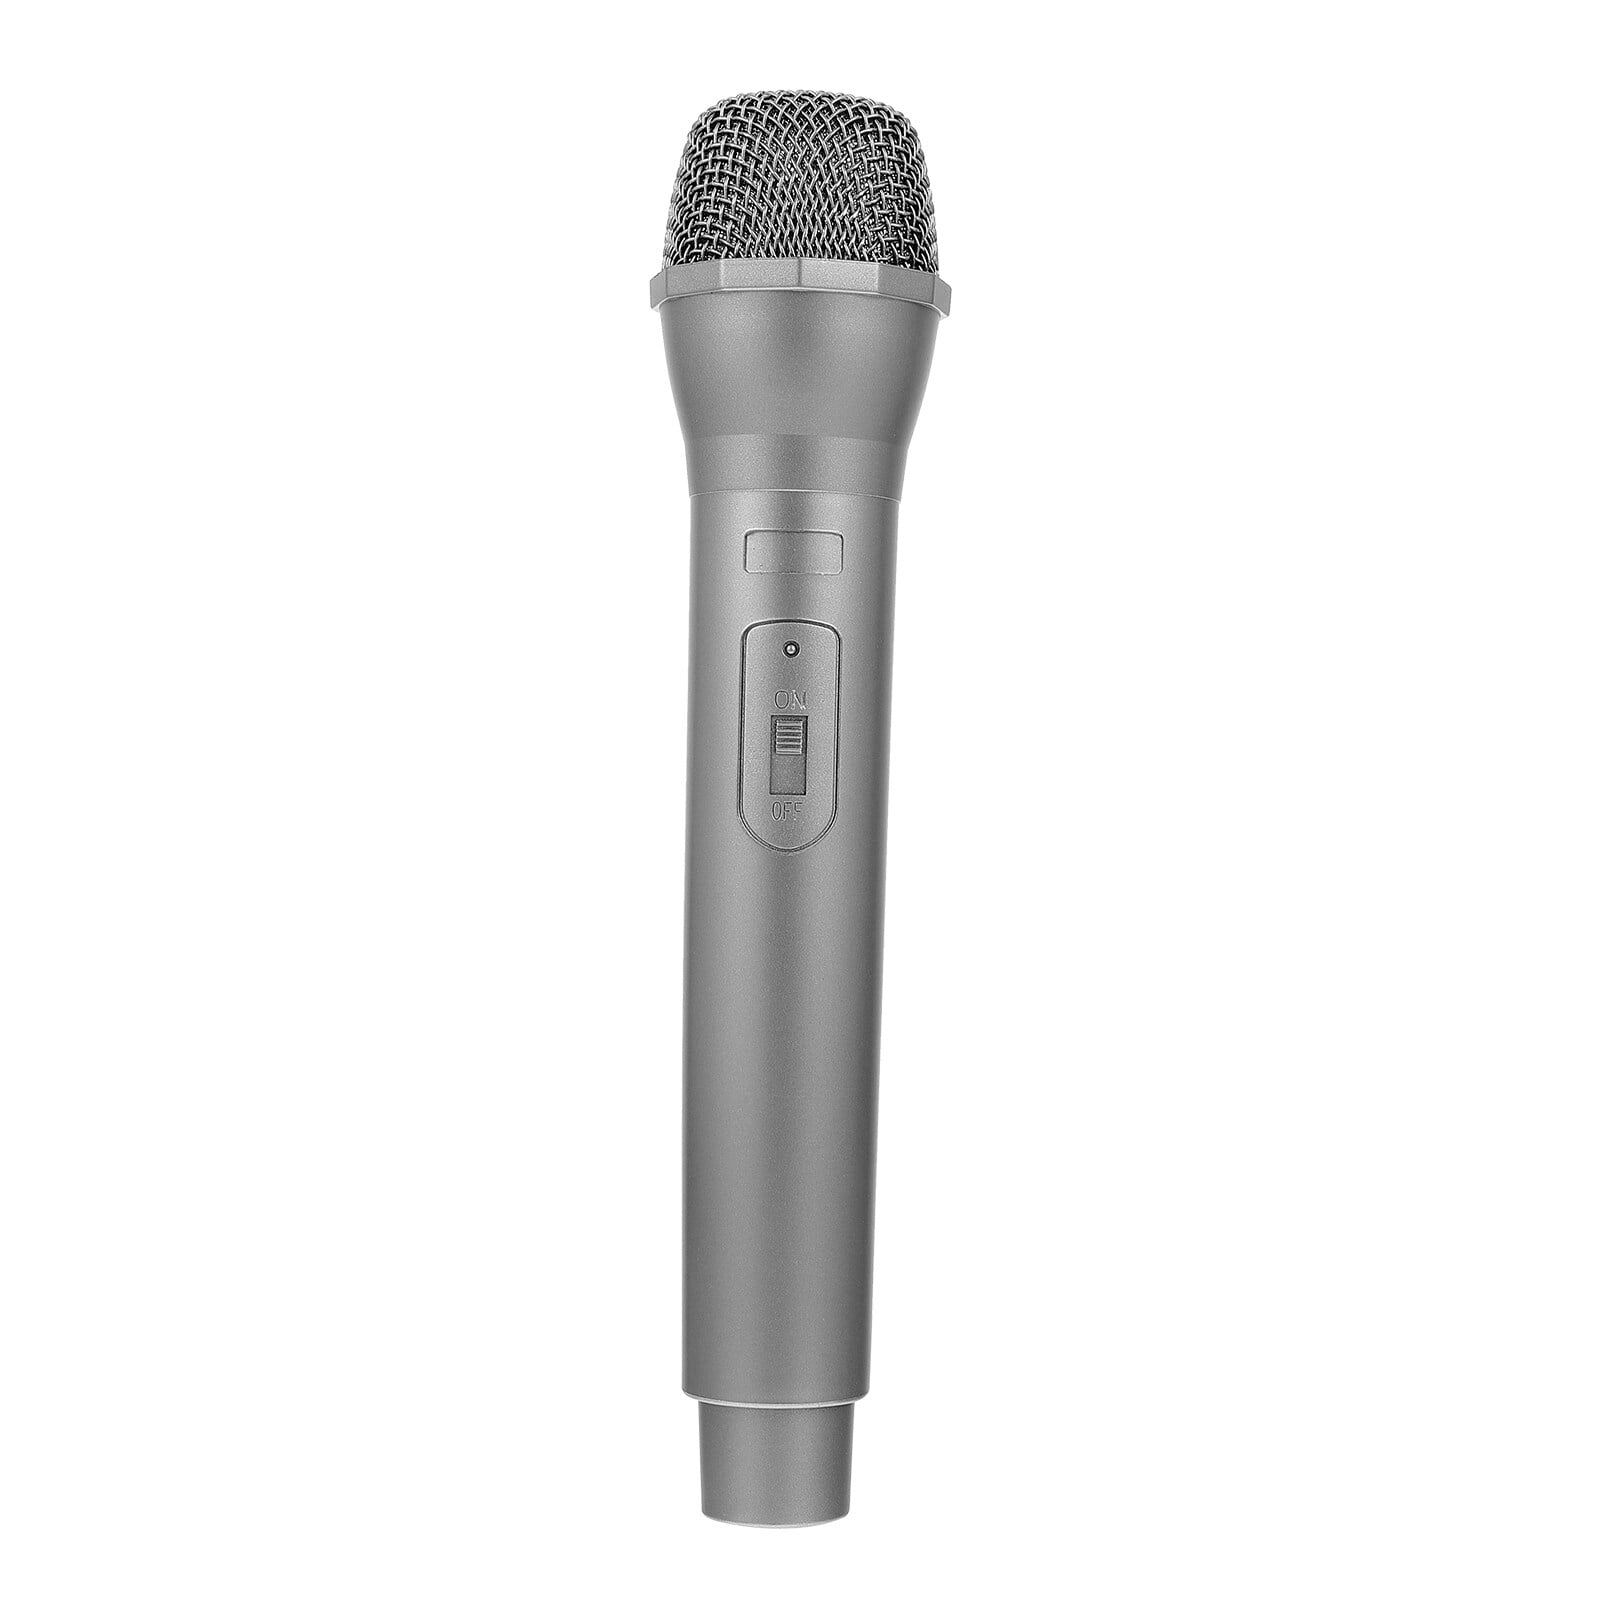 Portable 3.5mm Stereo Studio Mic For KTV Karaoke Mini Handheld Wired  Condenser Phone Microphone For Cell Phone, Laptop, PC, And Desktop From  Imagicsound, $9.97